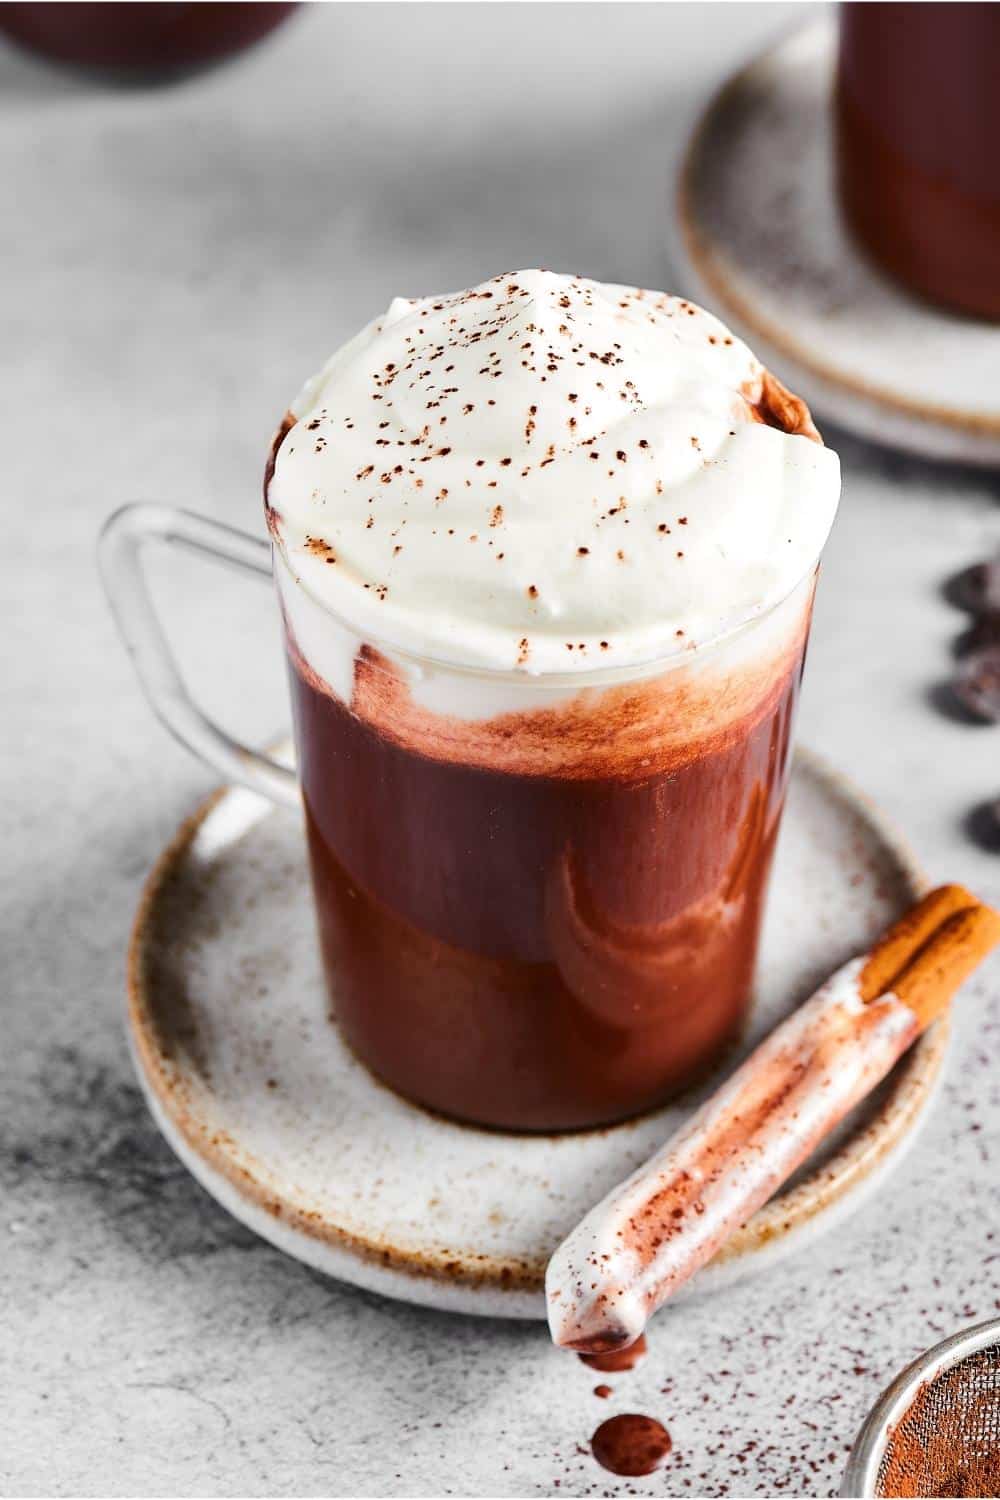 A glass mug filled with hot chocolate with whip cream on top on a grey plate with a cinnamon stick line across it.